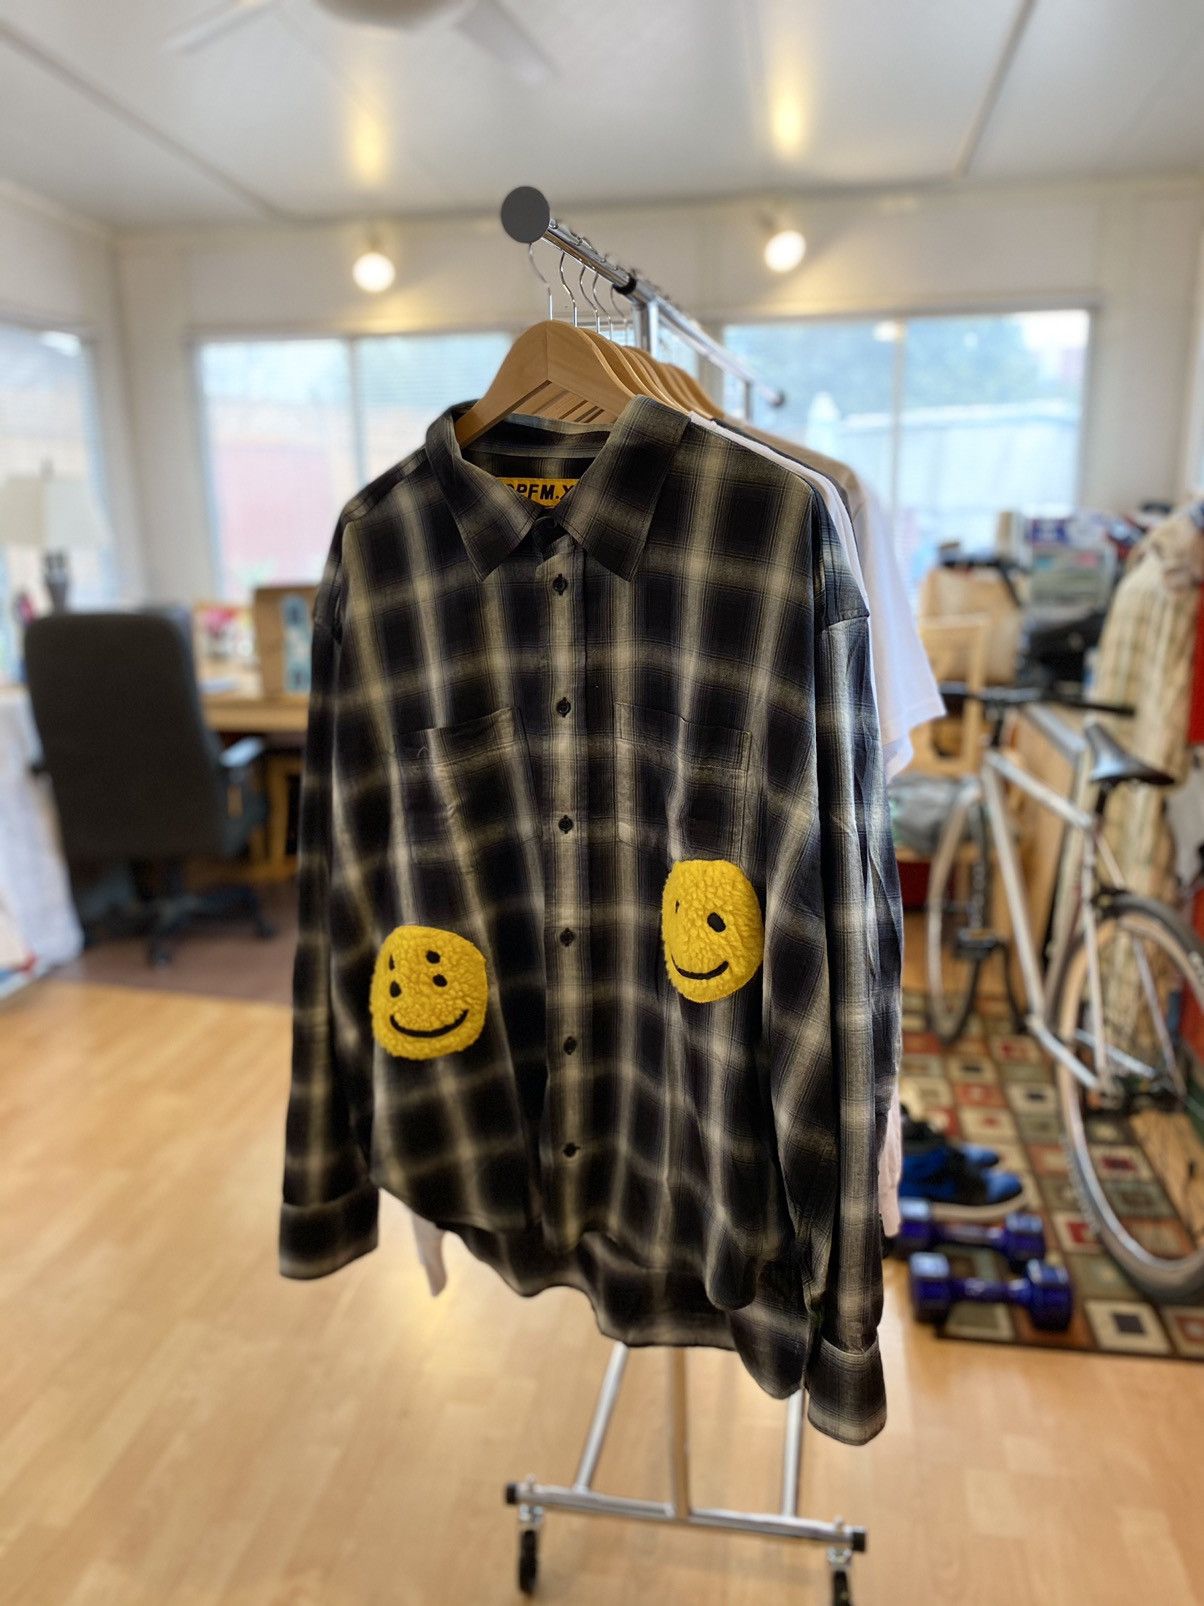 Humanmade CPFM DOUBLE VISION CHECK SHIRT